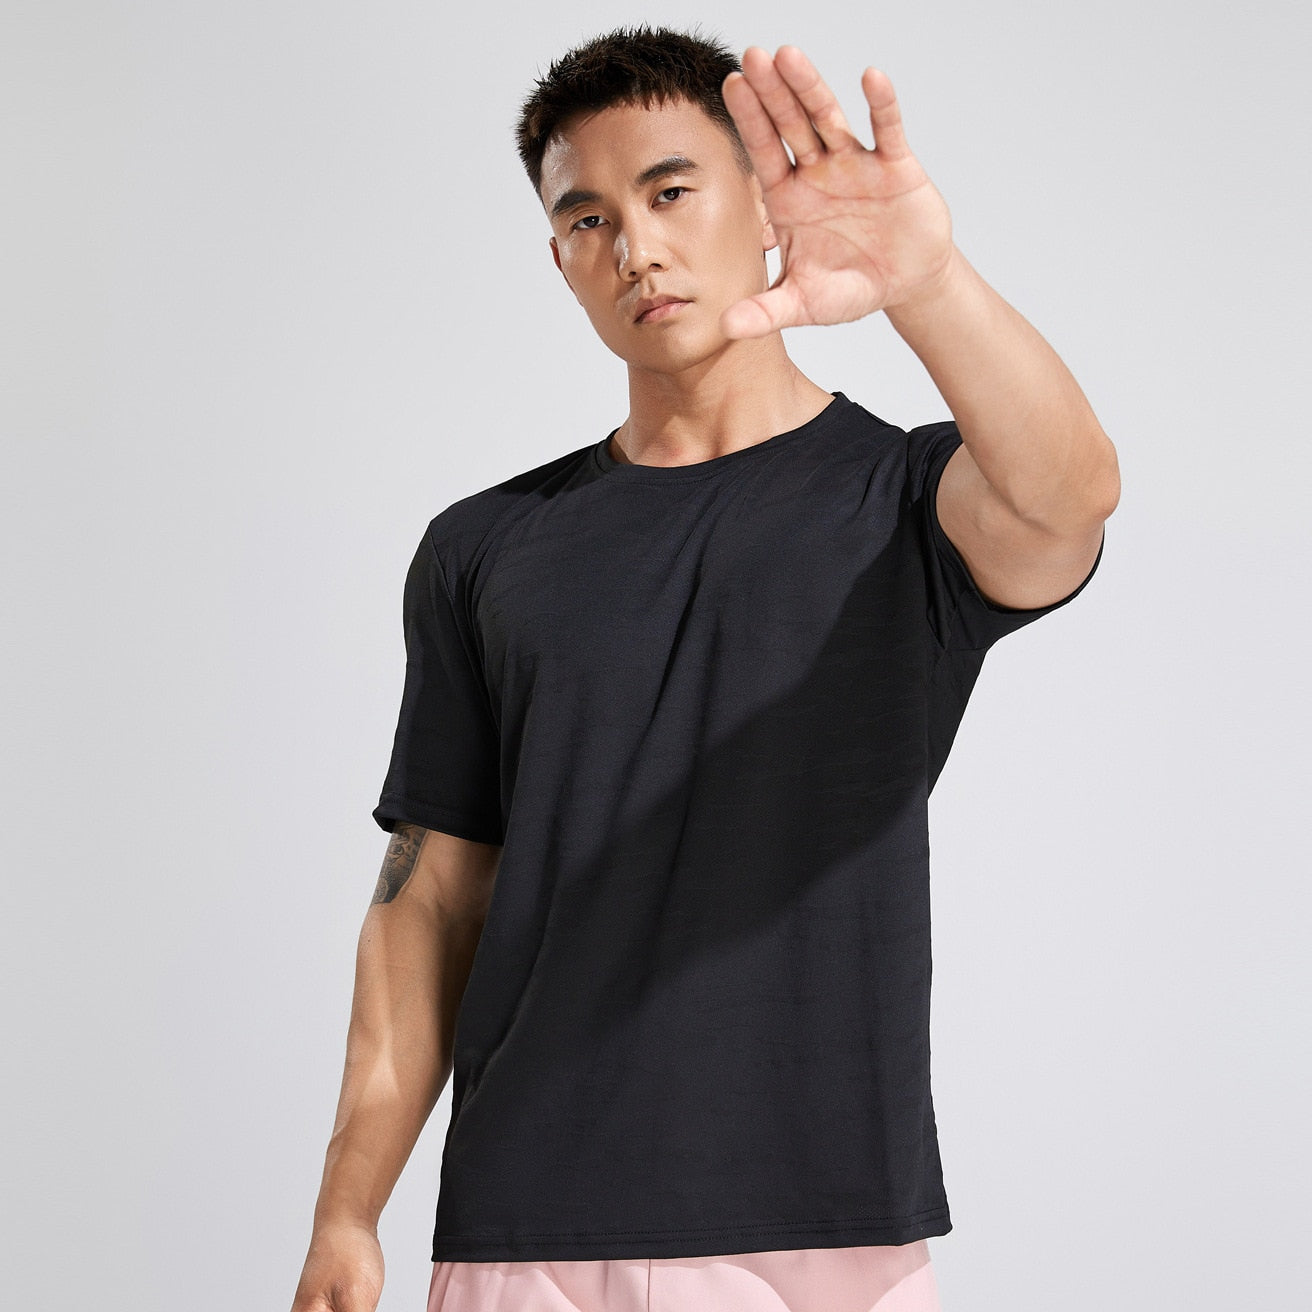 Summer Fitness Training T-shirt Men Casual Short Sleeve Shirt Male Gym Bodybuilding Tees Tops Running Sport Quick Dry Clothing